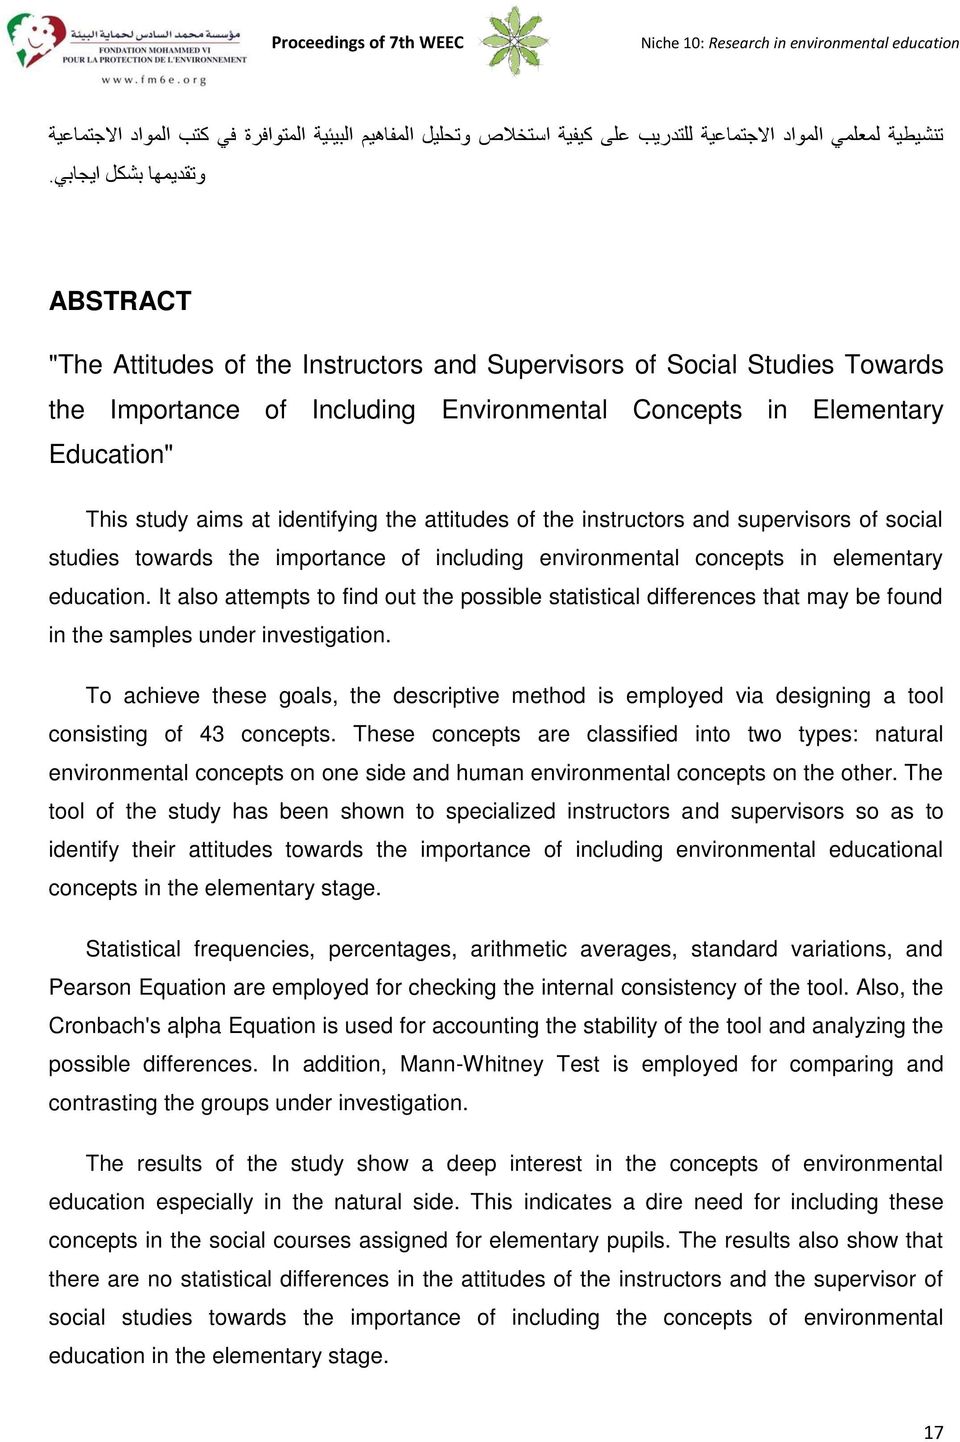 ABSTRACT "The Attitudes of the Instructors and Supervisors of Social Studies Towards the Importance of Including Environmental Concepts in Elementary Education" This study aims at identifying the